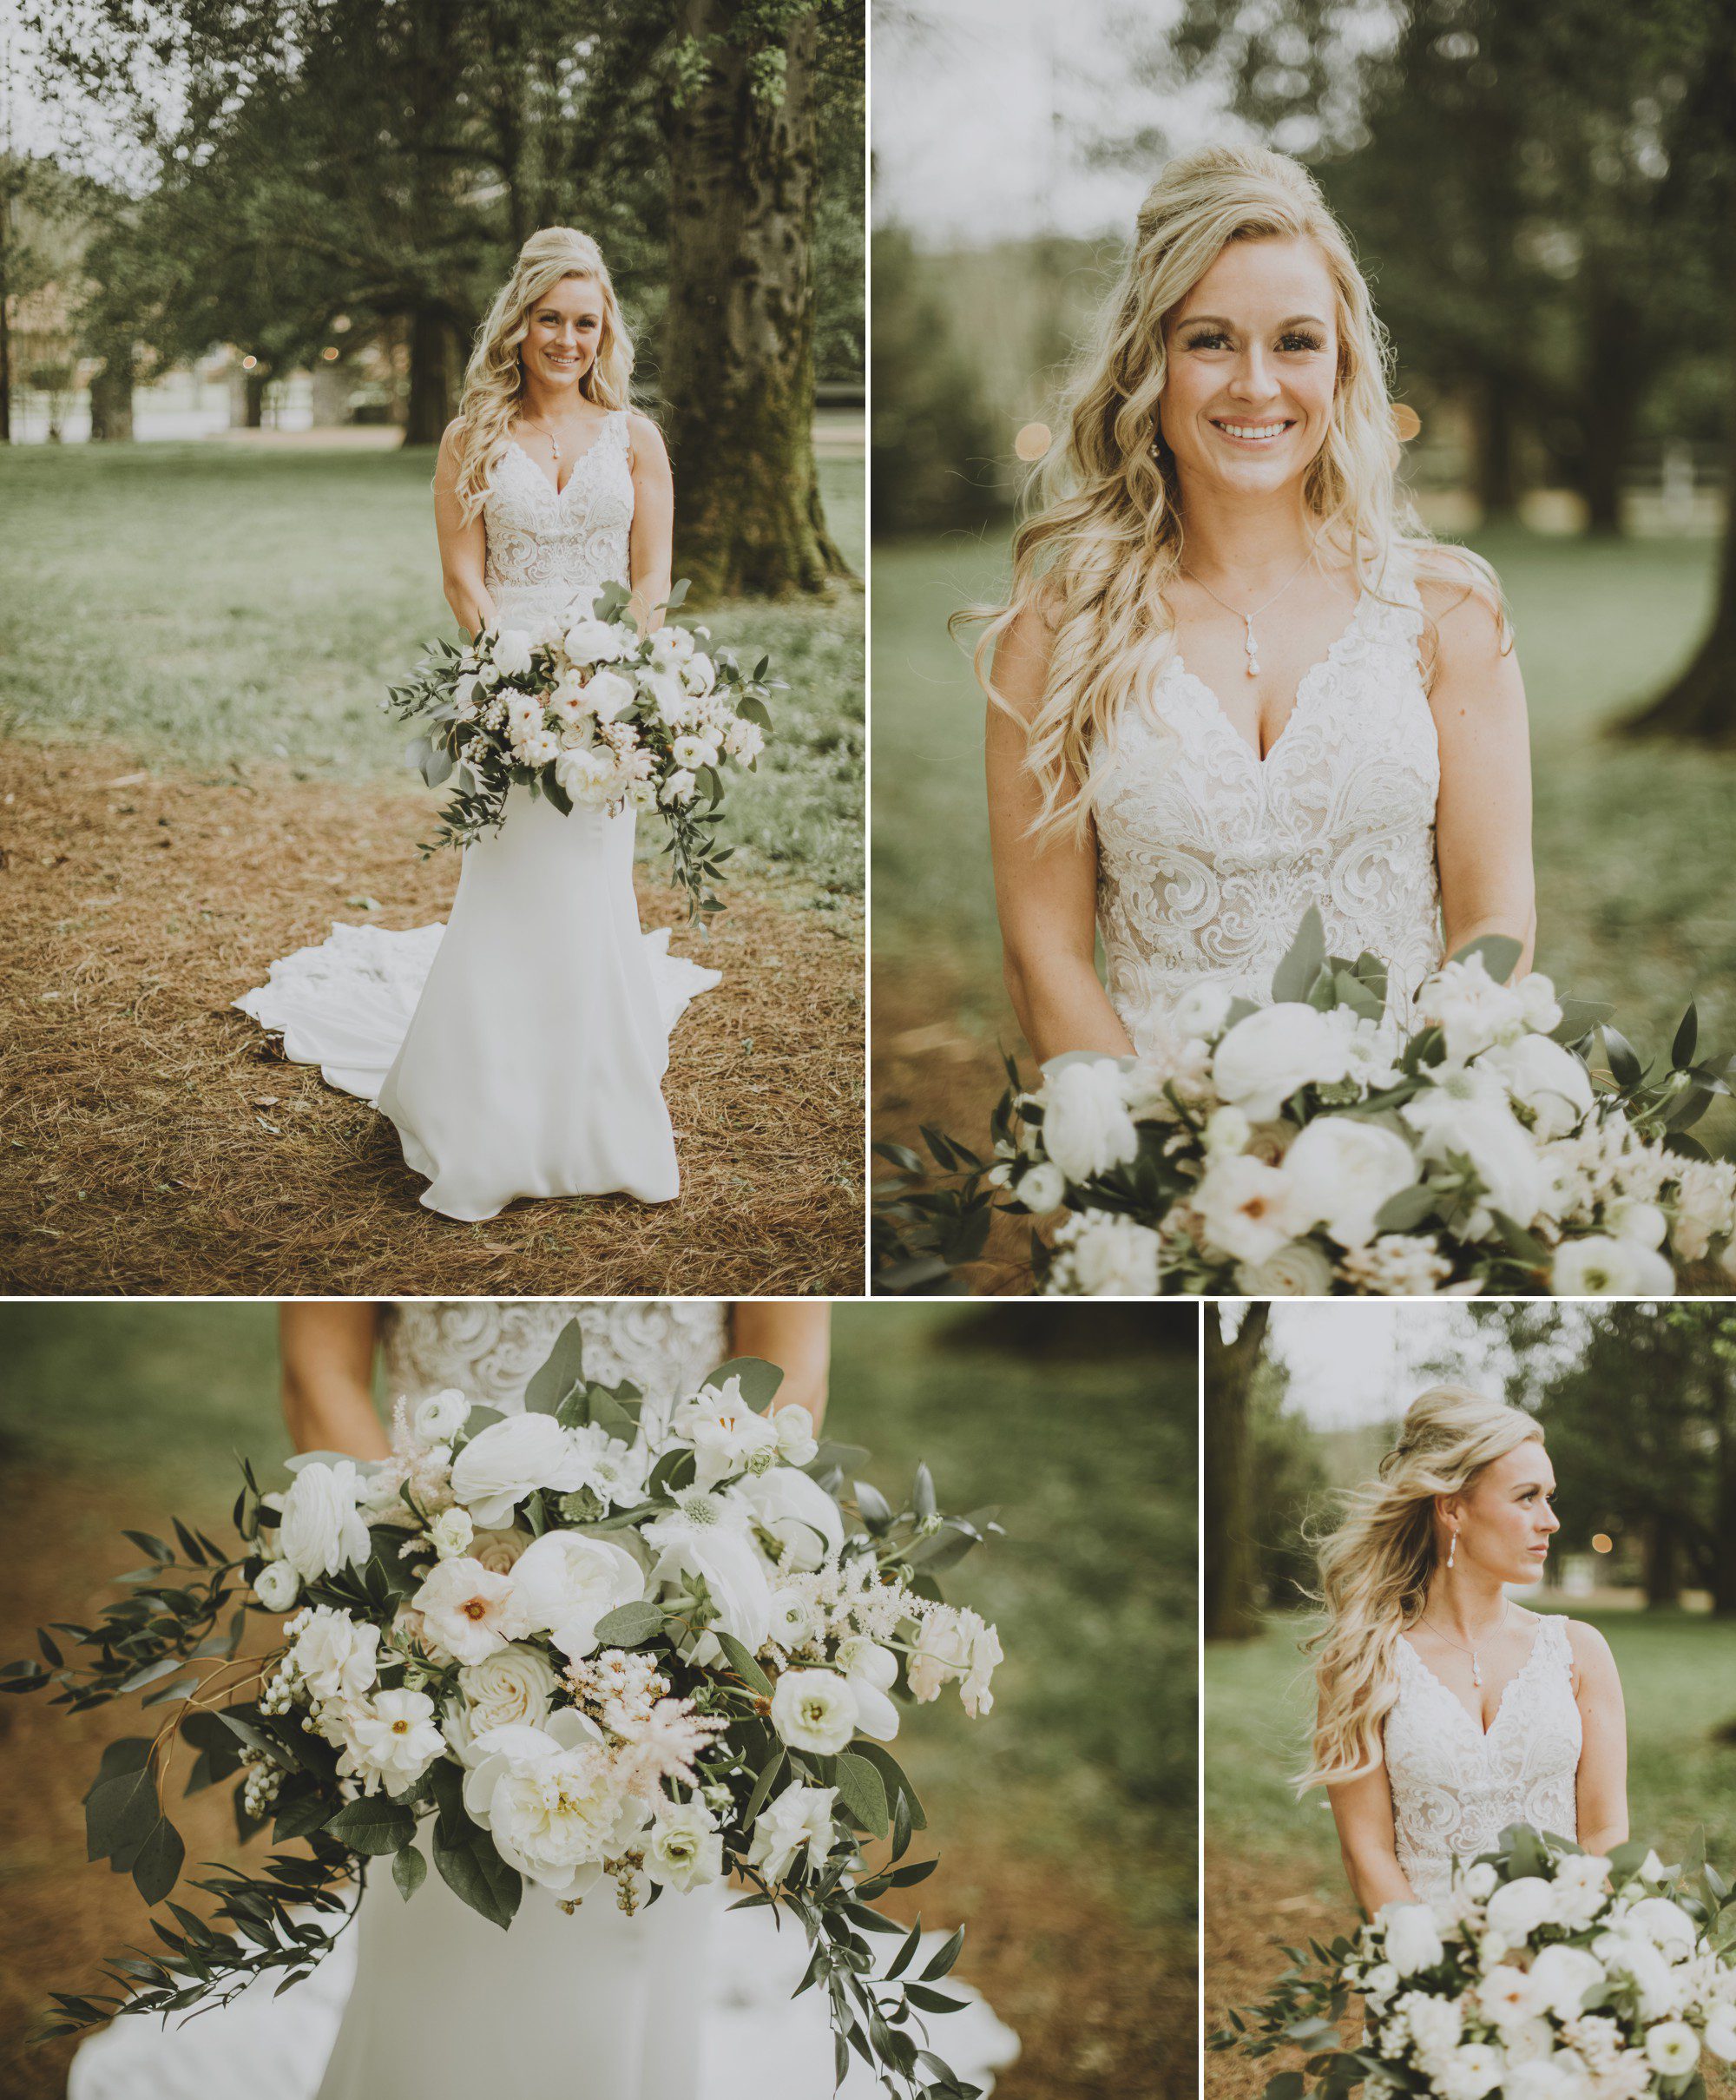 Bridal portraits outdoors before the wedding ceremony at Cedarwood weddings in Nashville, TN. April spring wedding, photos by Krista Lee Photography.